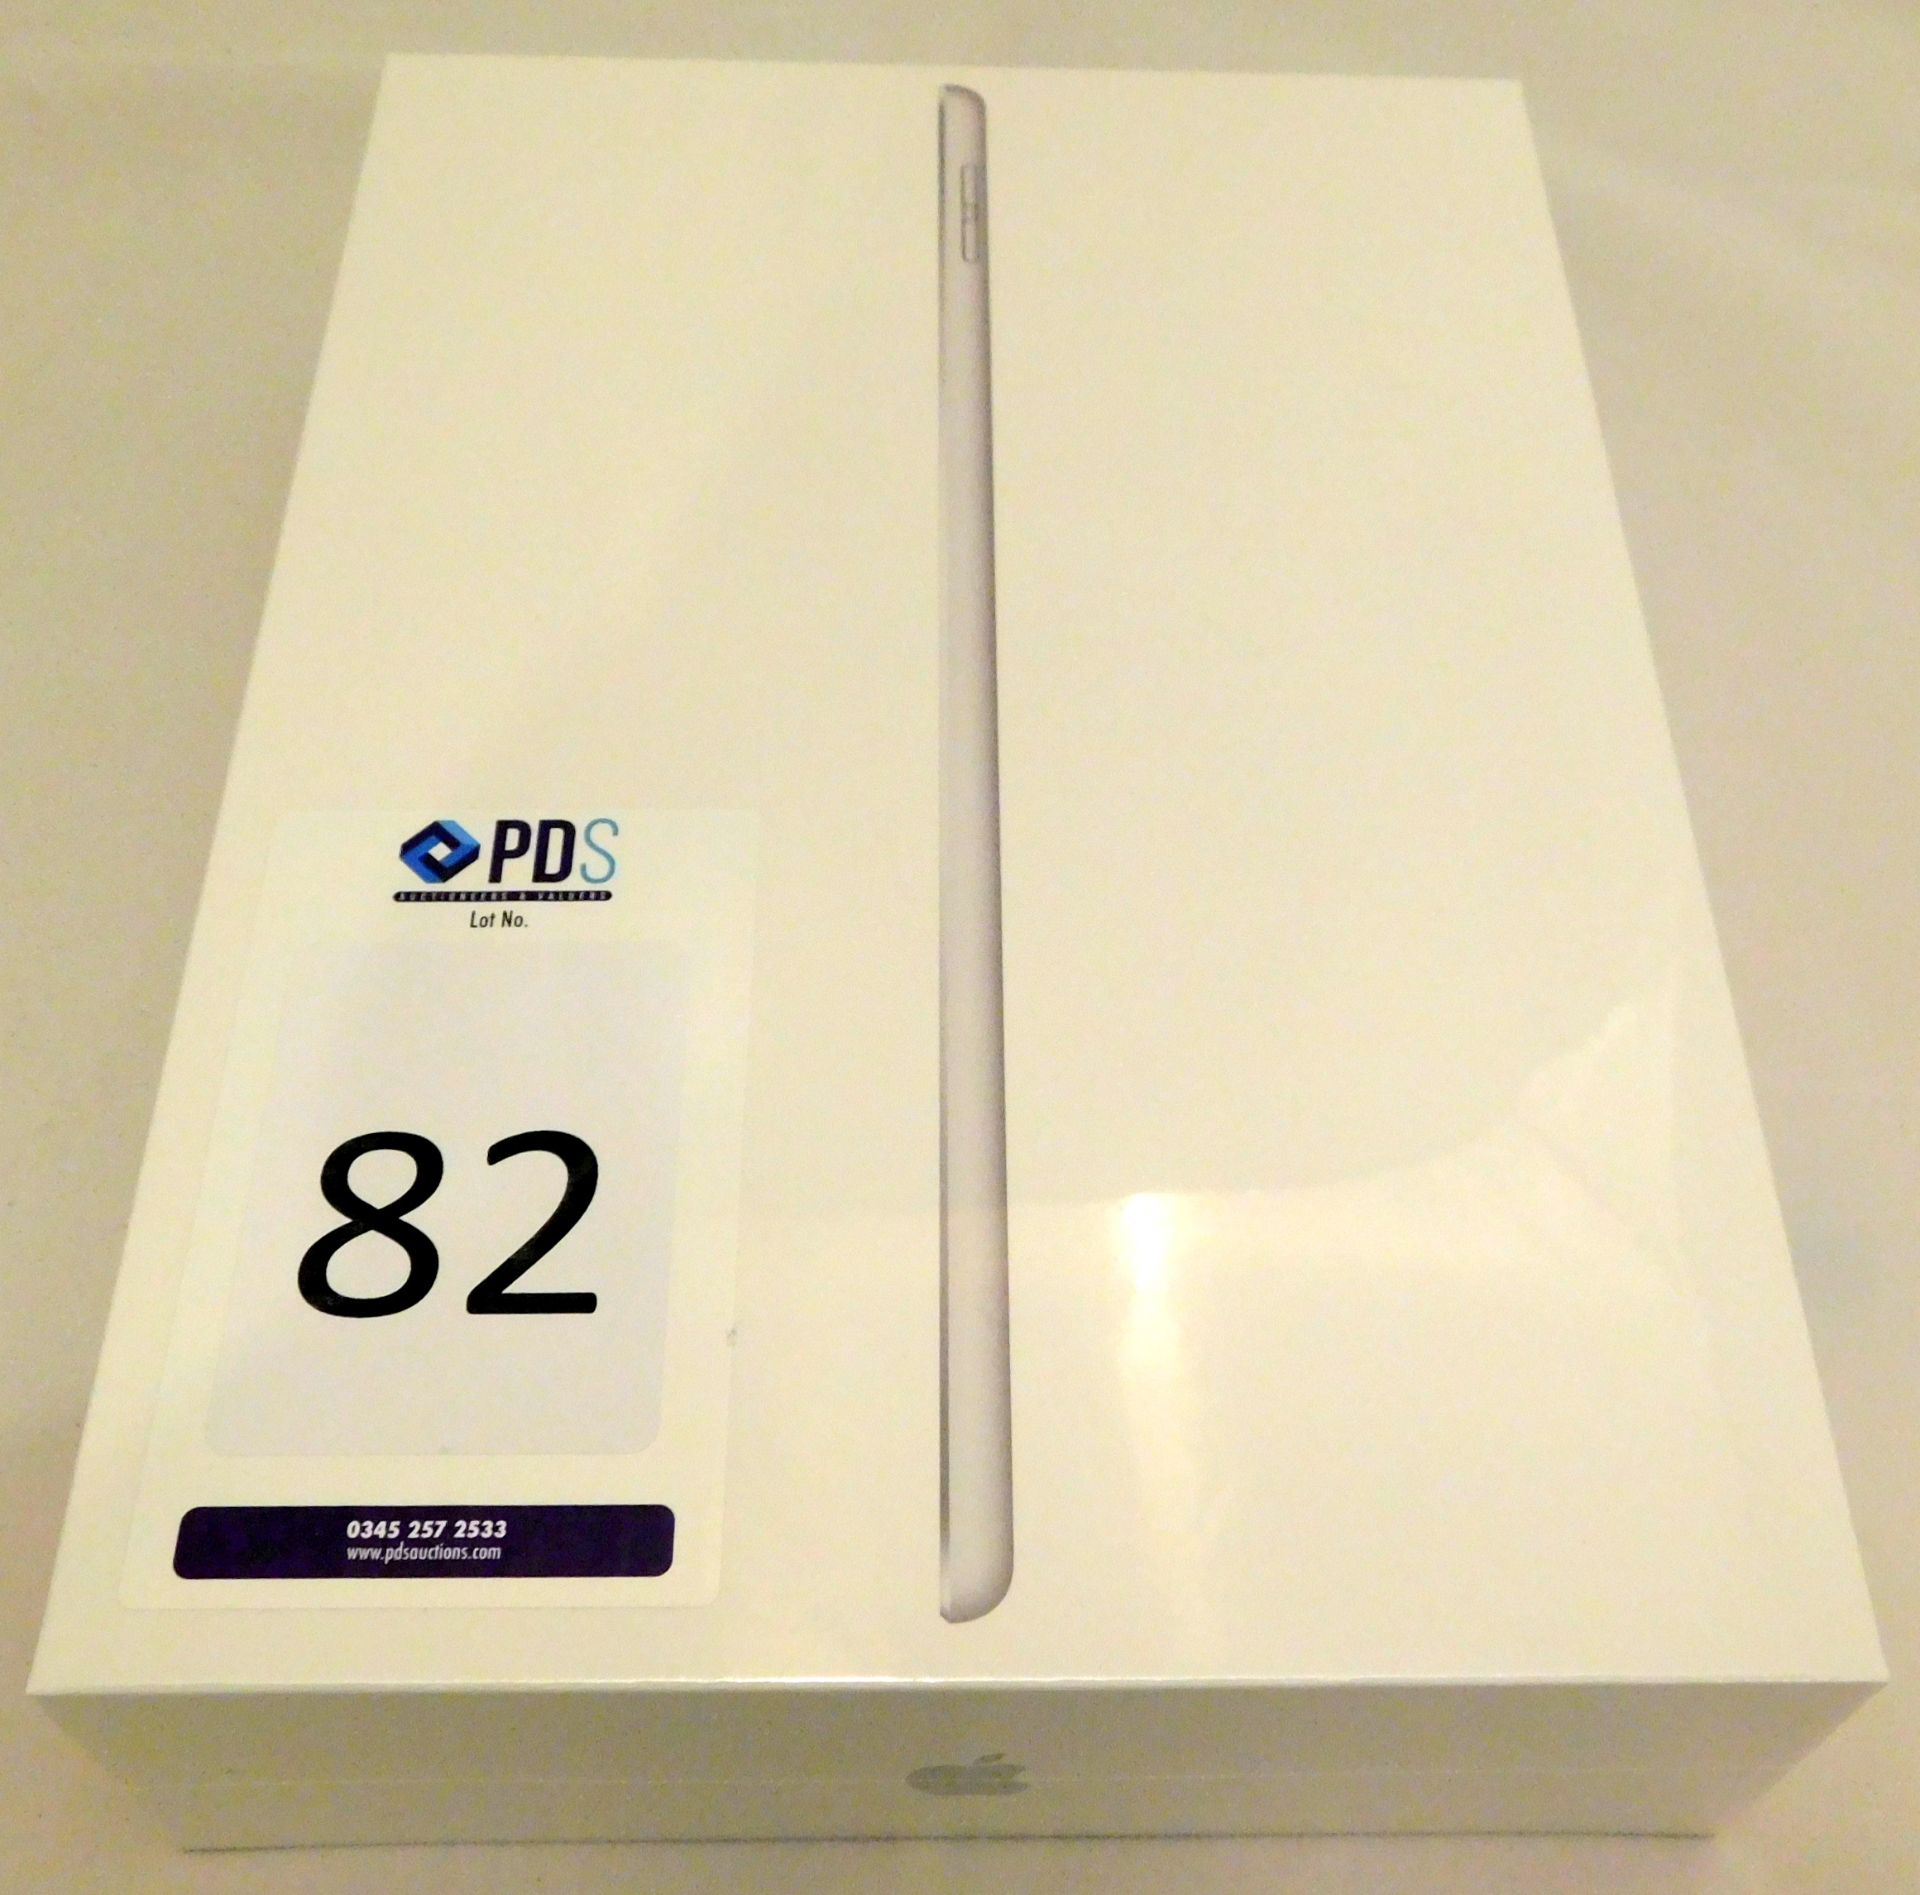 Apple A2197 iPad, 7th Gen, 32GB, Silver, Serial Number: DMPC80ZYMF3N, (New in Sealed Box) (Located